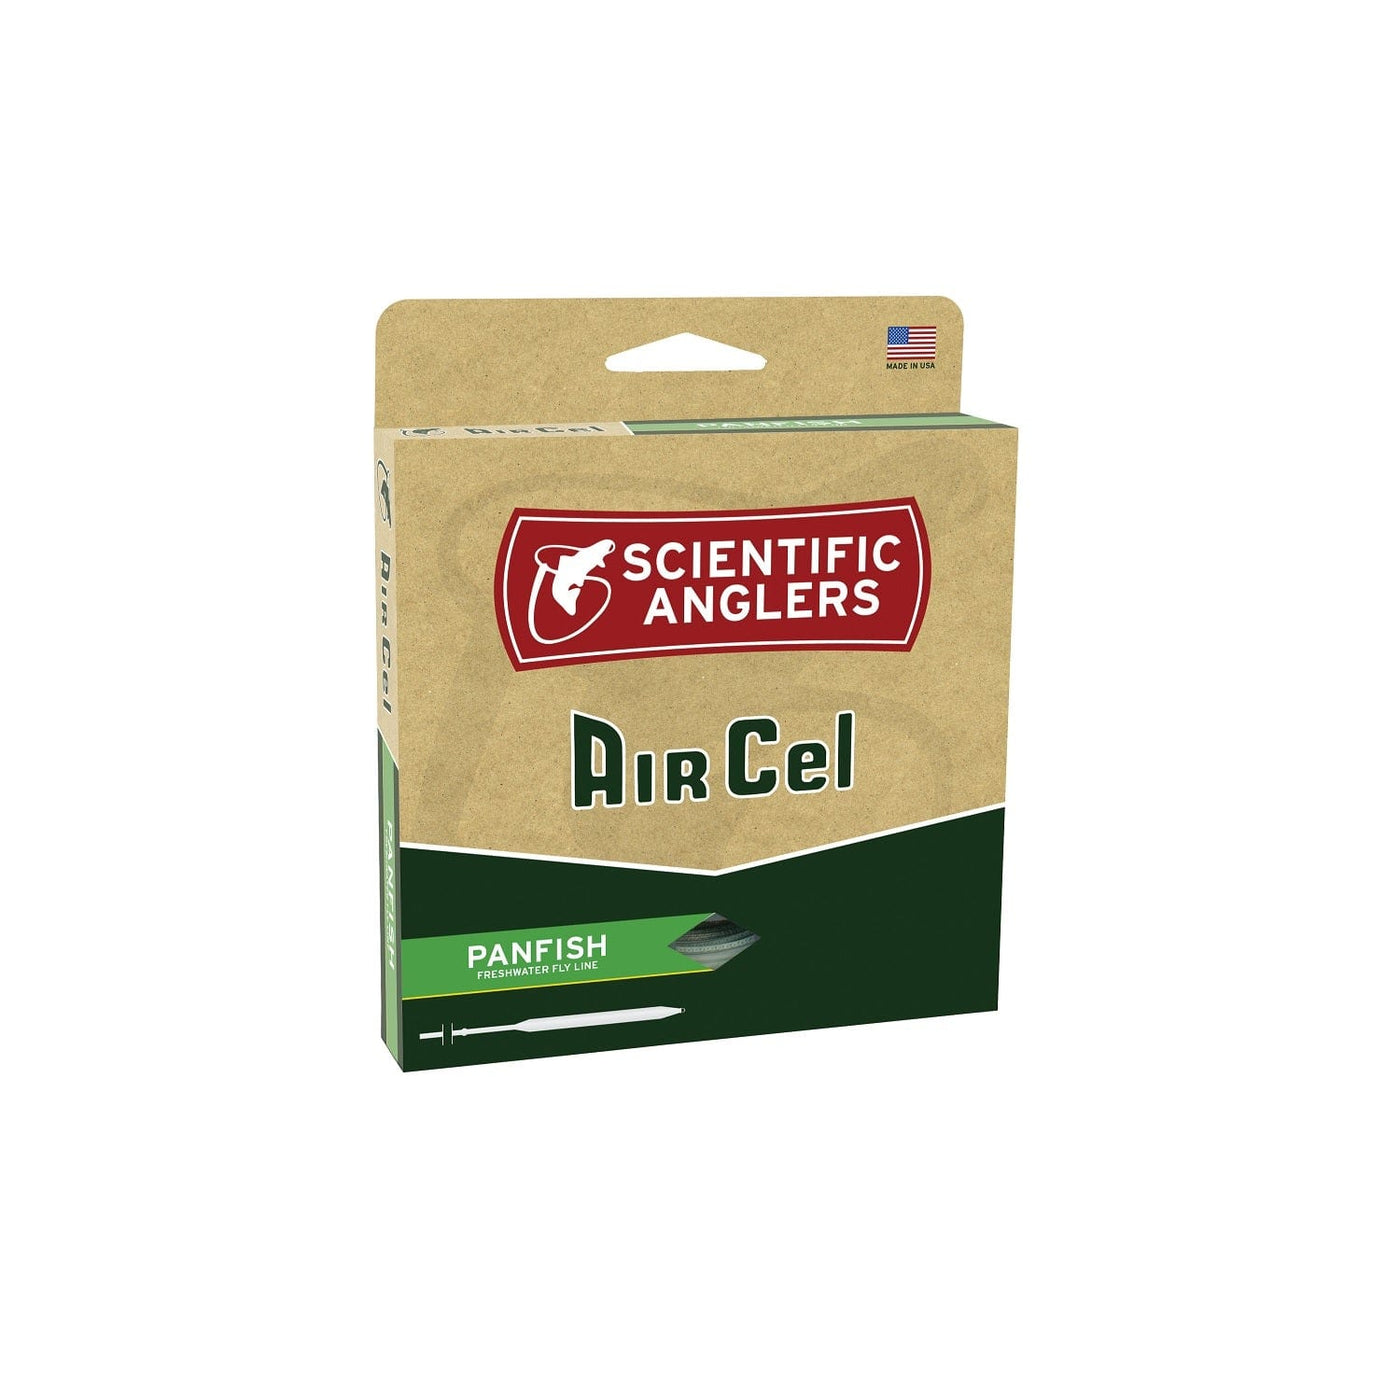 Scientific Anglers Scientific Anglers AirCel Floating Panfish Fly Line-5 6-Orng Fishing